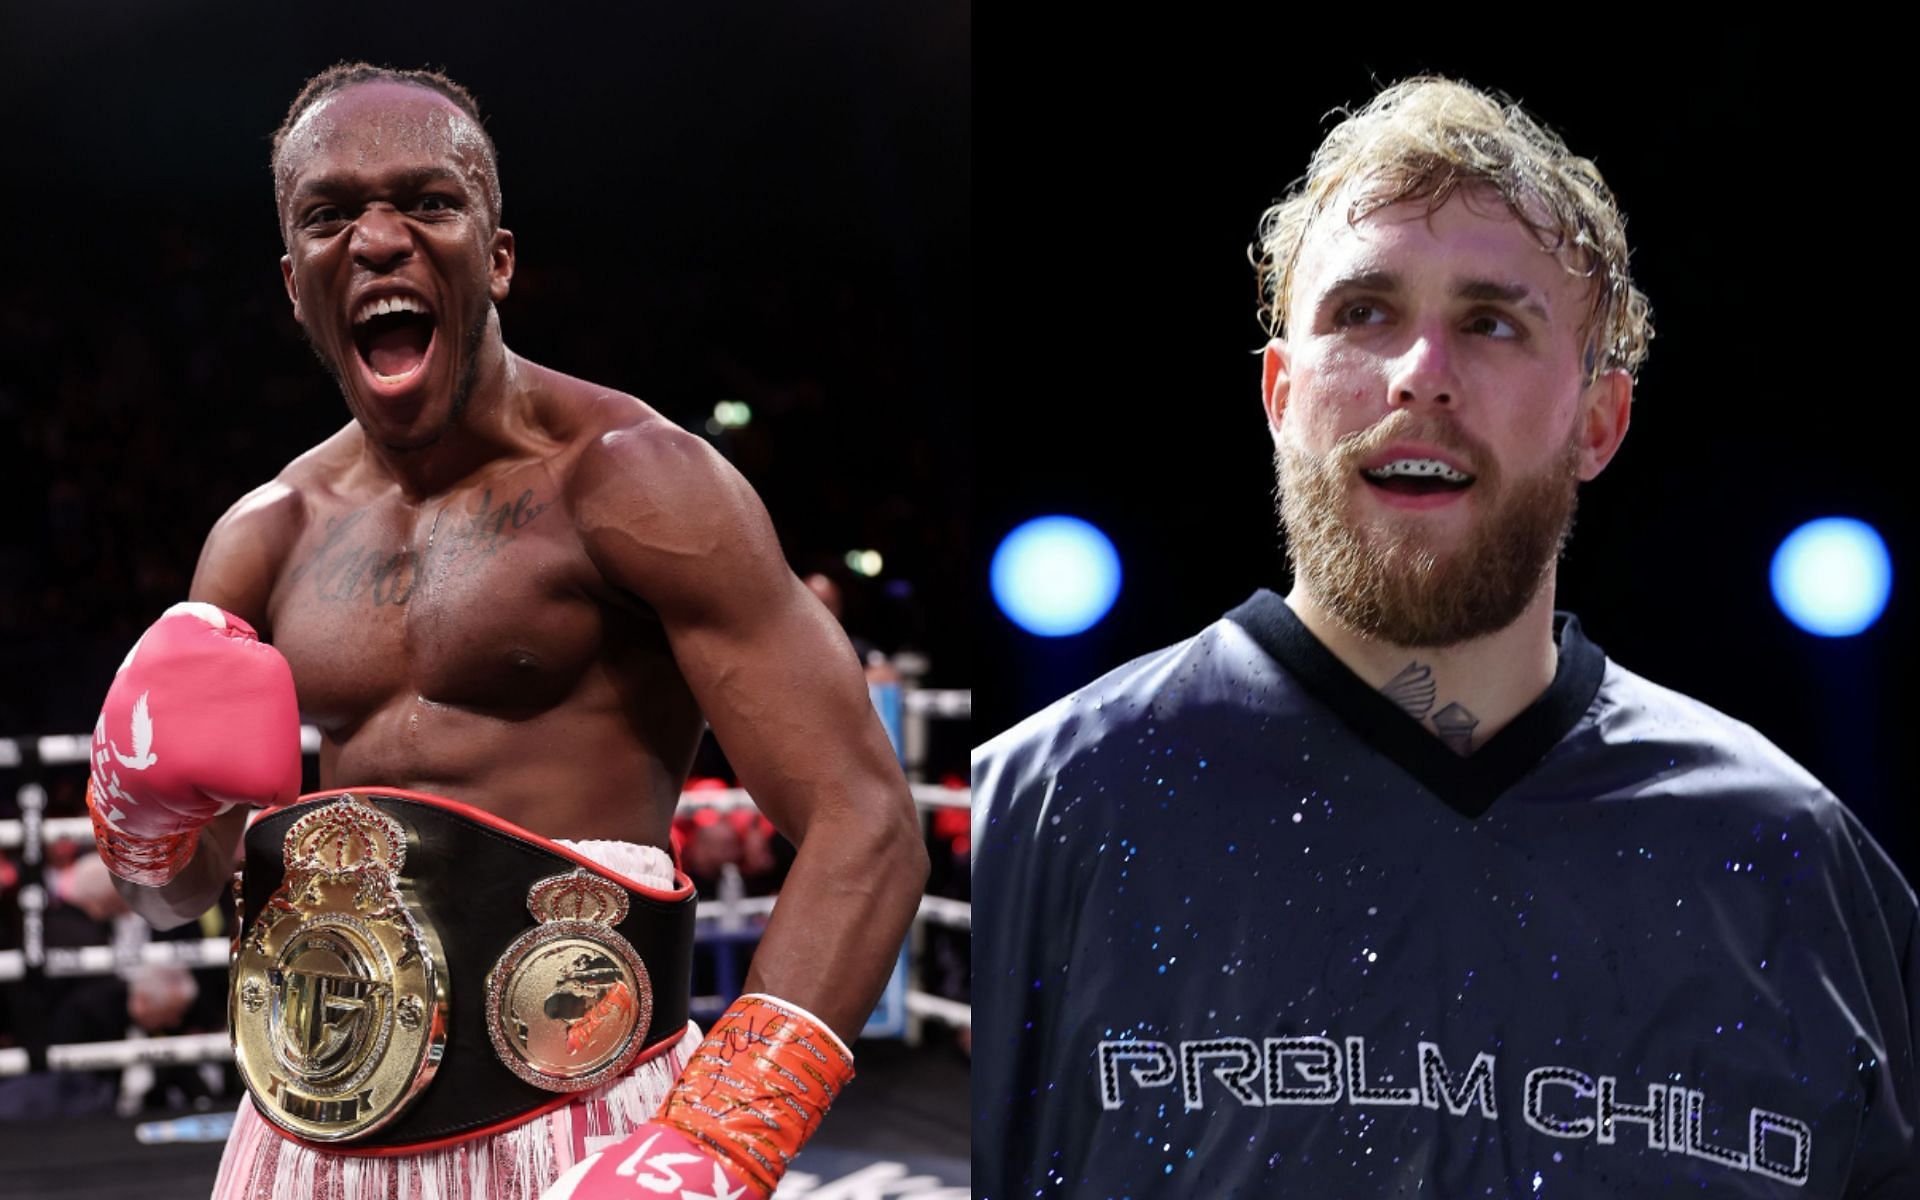  (Left) KSI and Jake Paul (Right)  (Image credits: Getty Images)